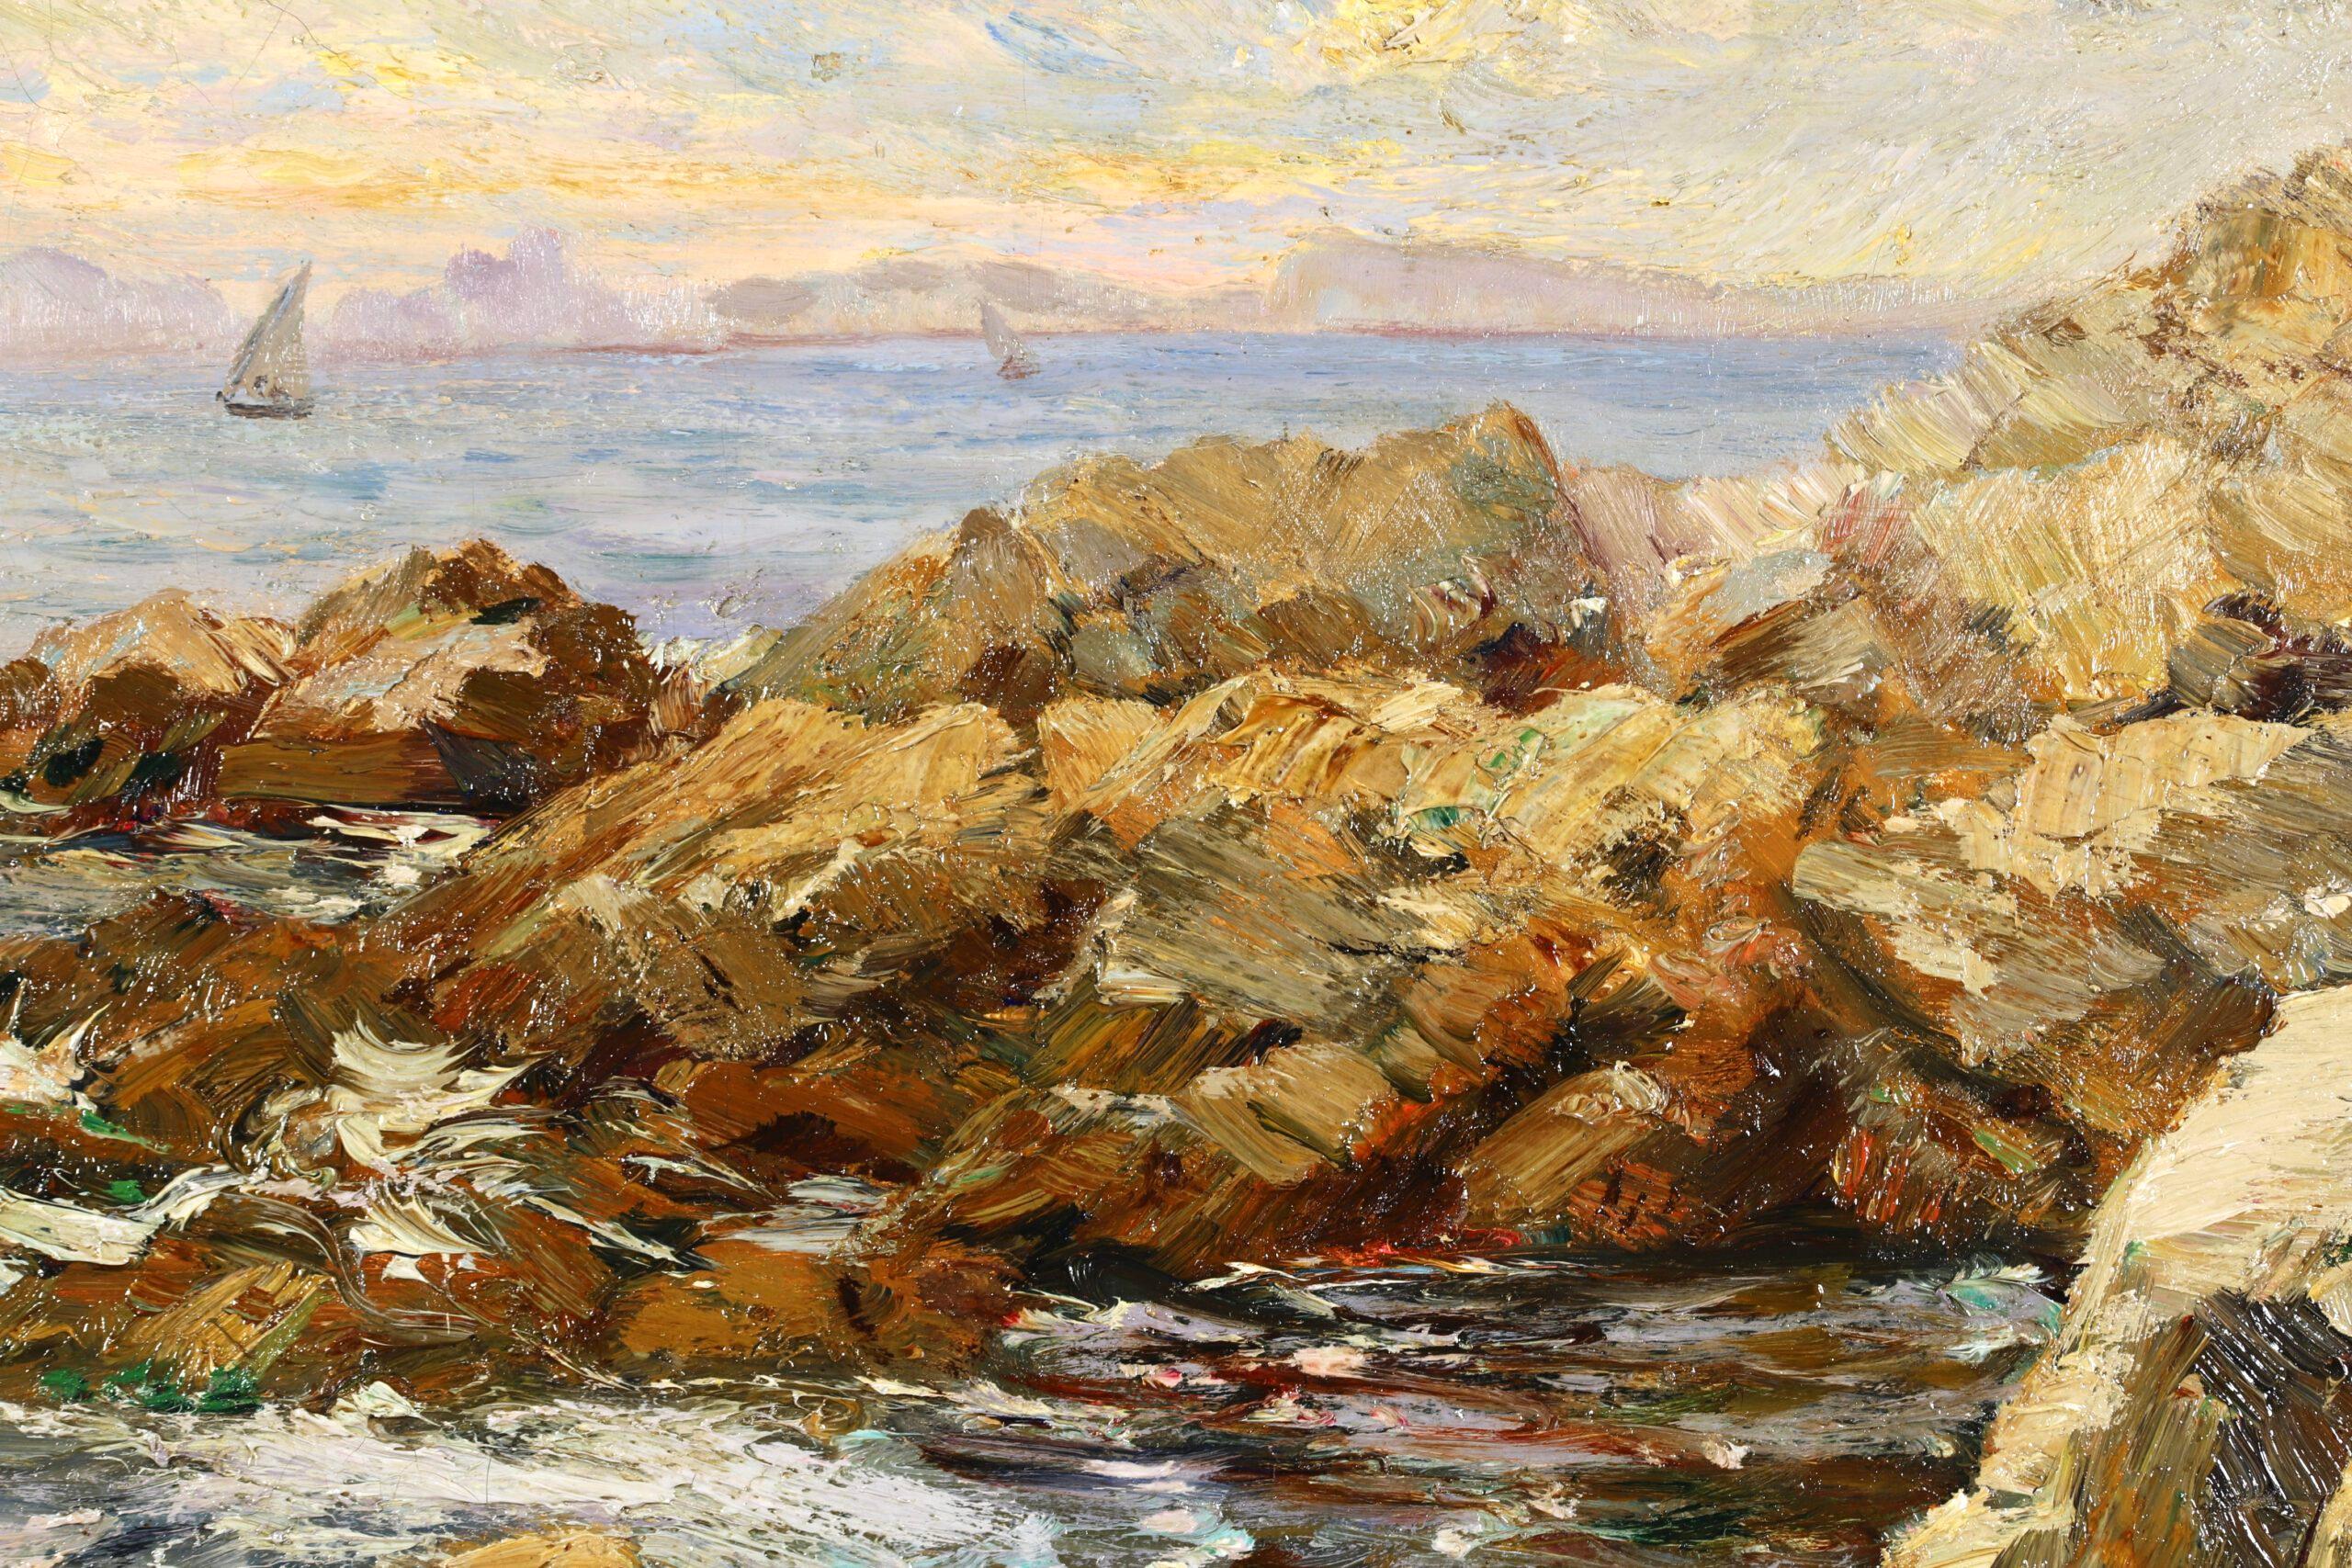 Environs de Marseille - Post Impressionist Sea Landscape Oil by Adolphe Gaussen - Post-Impressionist Painting by Adolphe Louis Gaussen